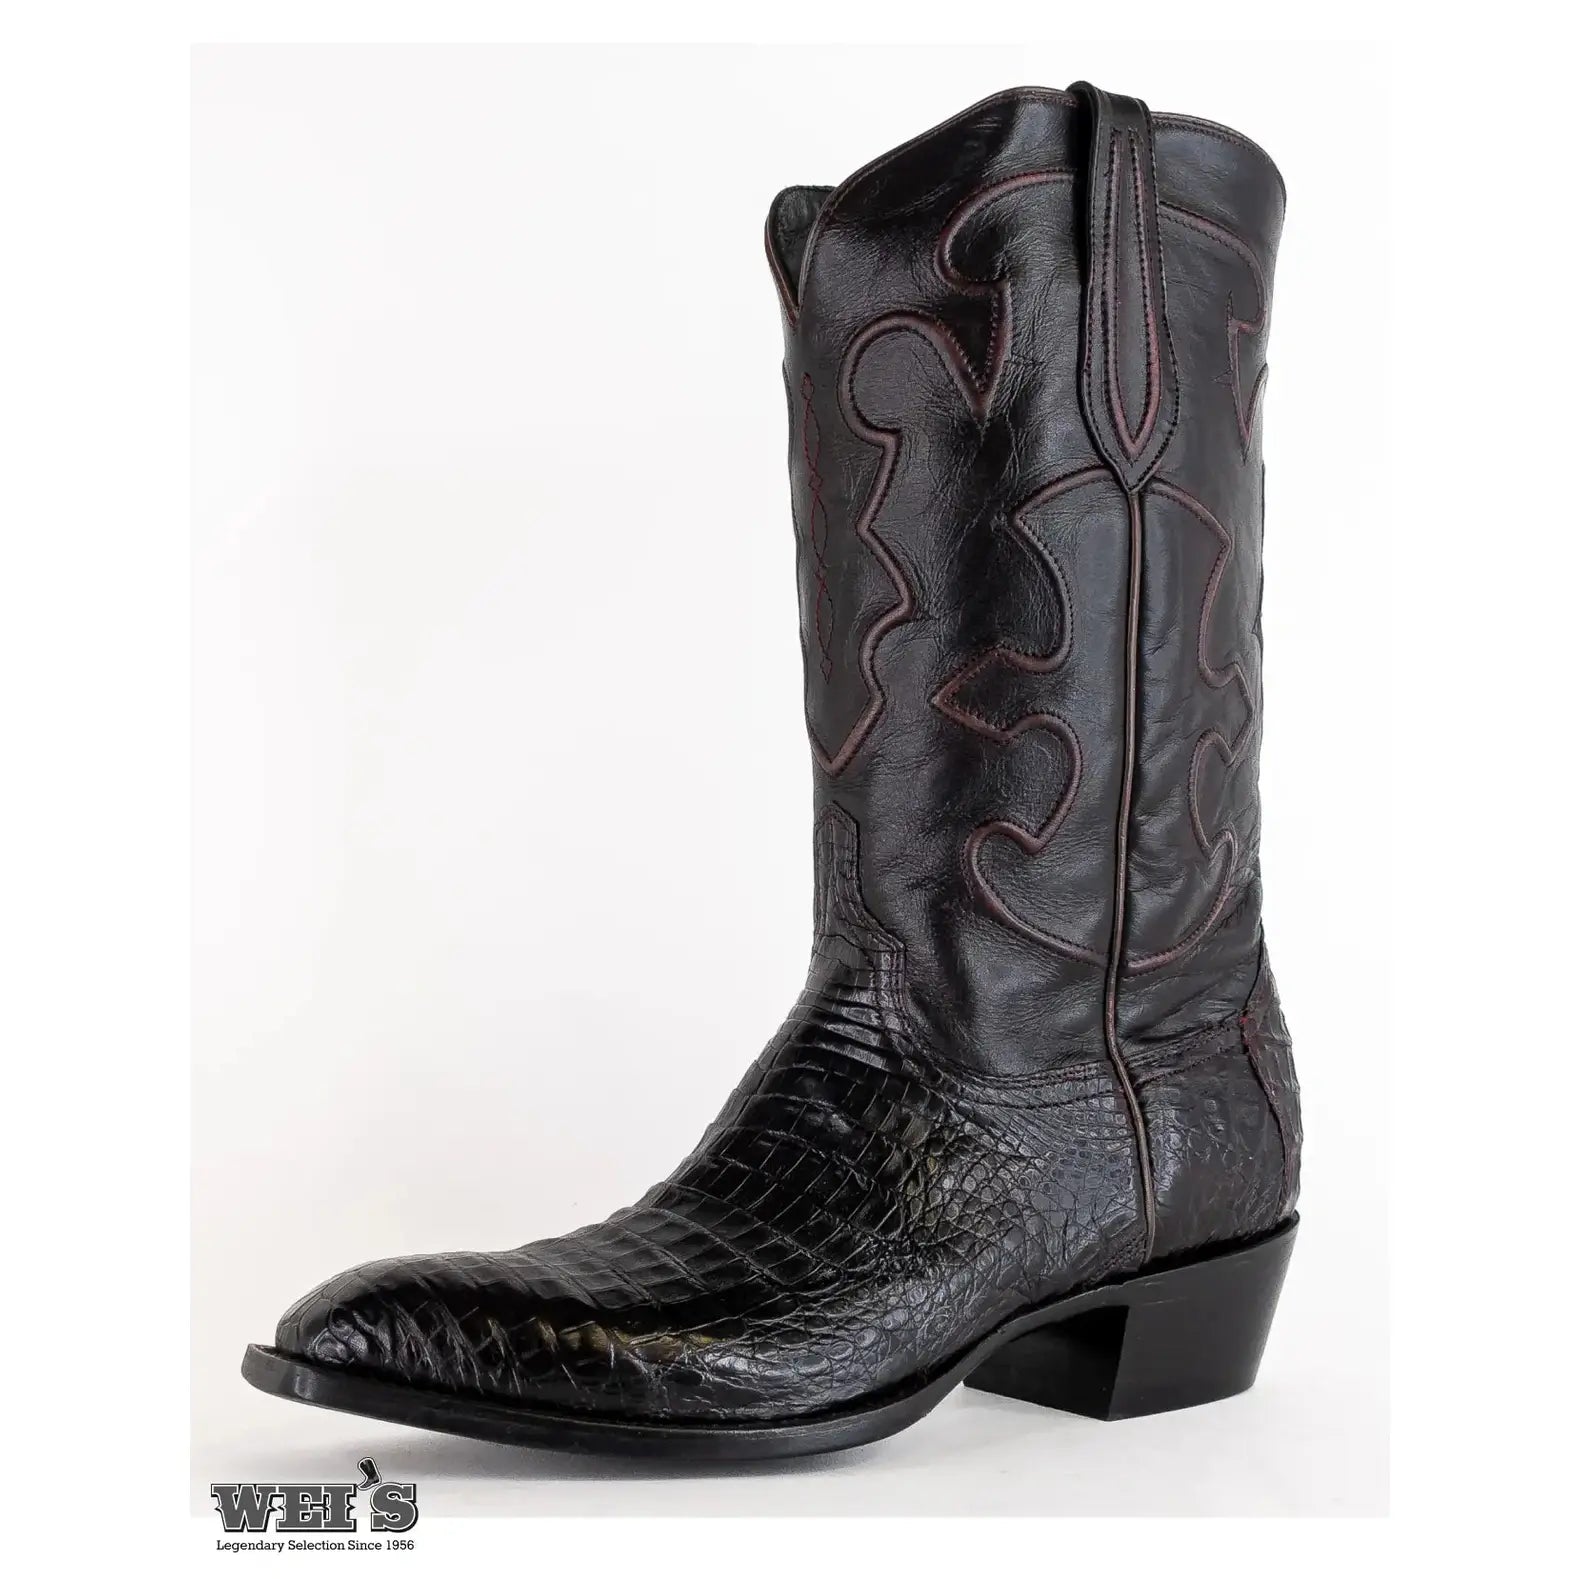 Lucchese Men's Cowboy Boots 13" Exotic Caiman Back Cherry M1637.14